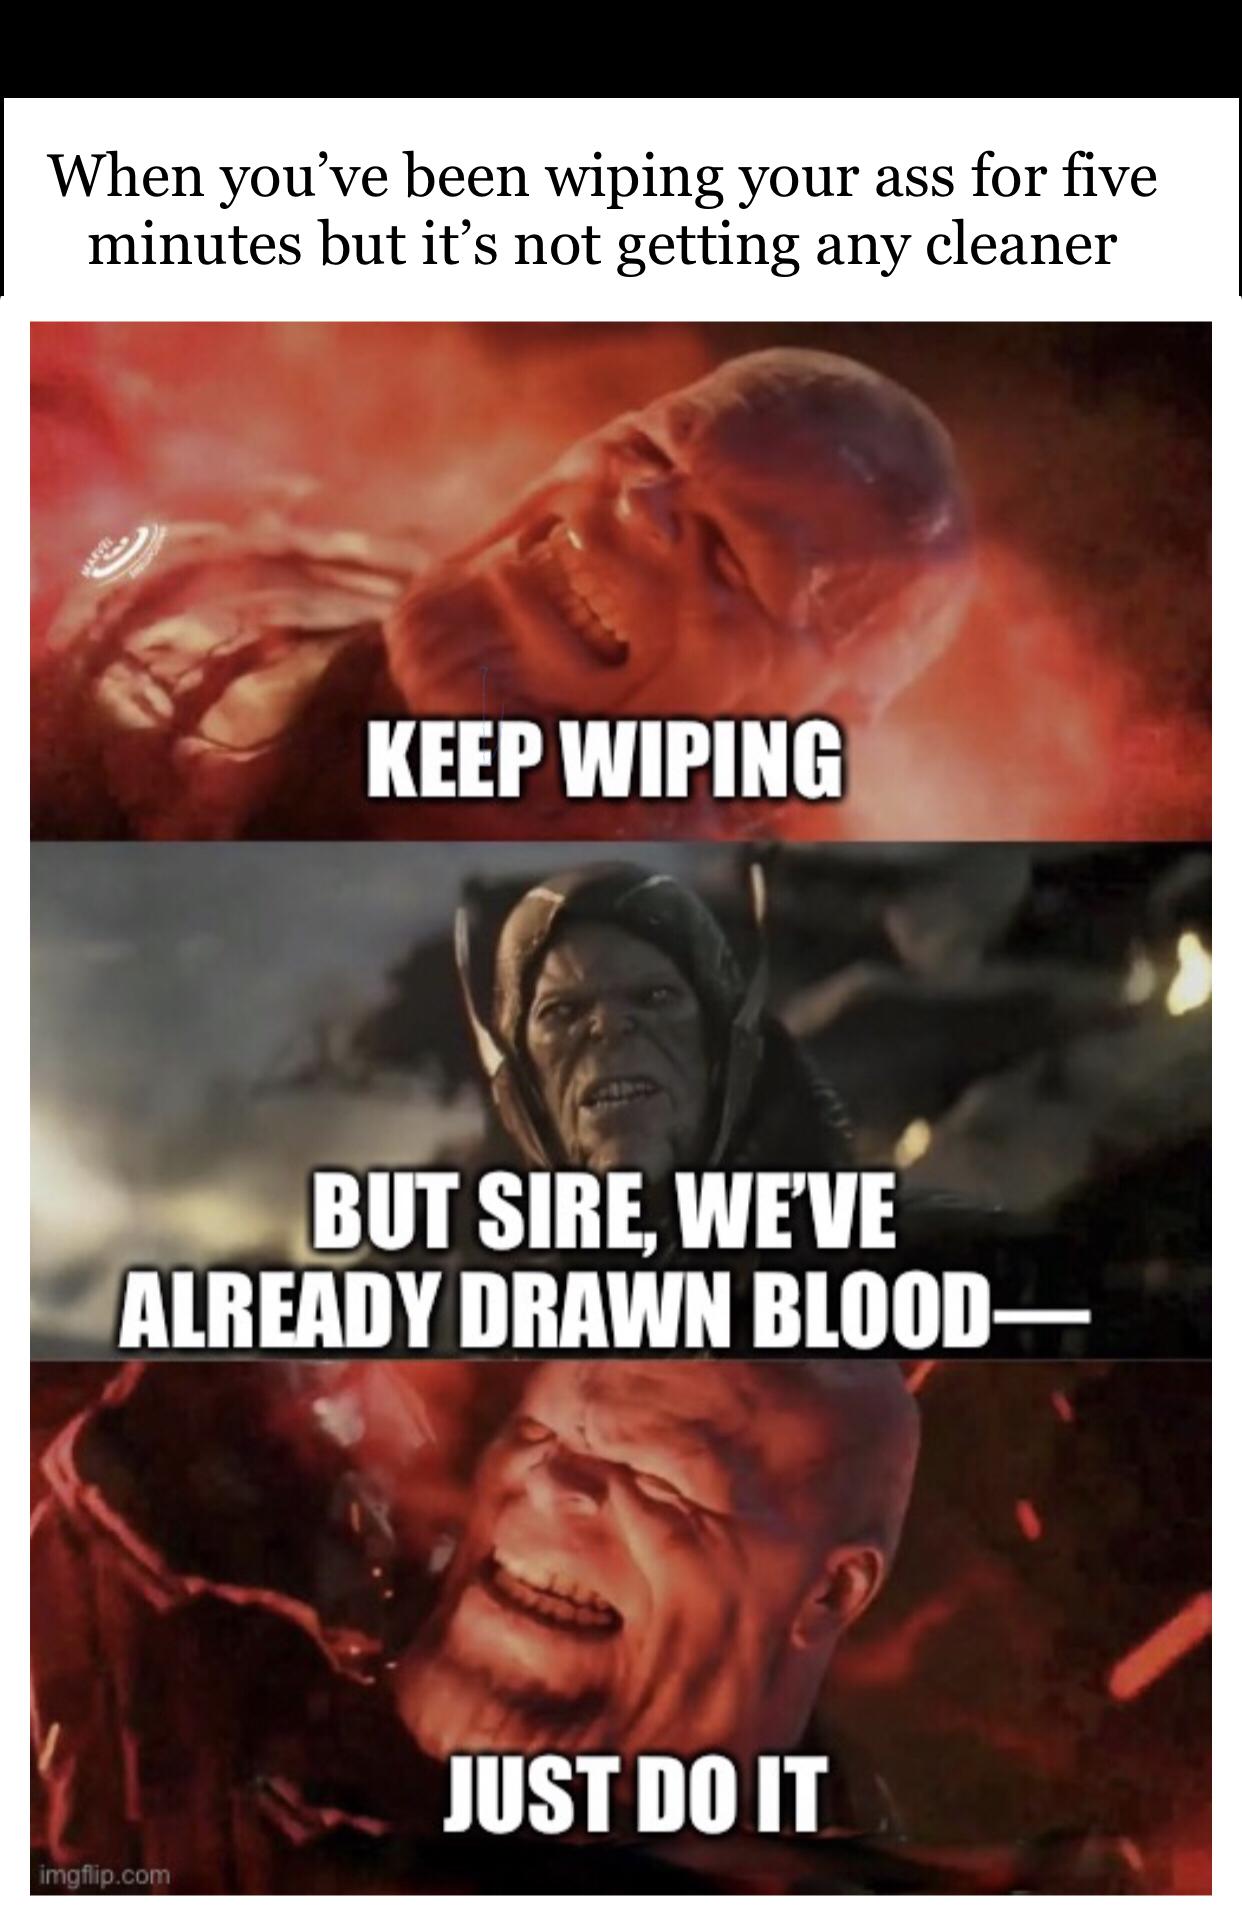 it meme thanos - When you've been wiping your ass for five minutes but it's not getting any cleaner Keep Wiping But Sire, We'Ve Already Drawn Blood Just Do It imgflip.com